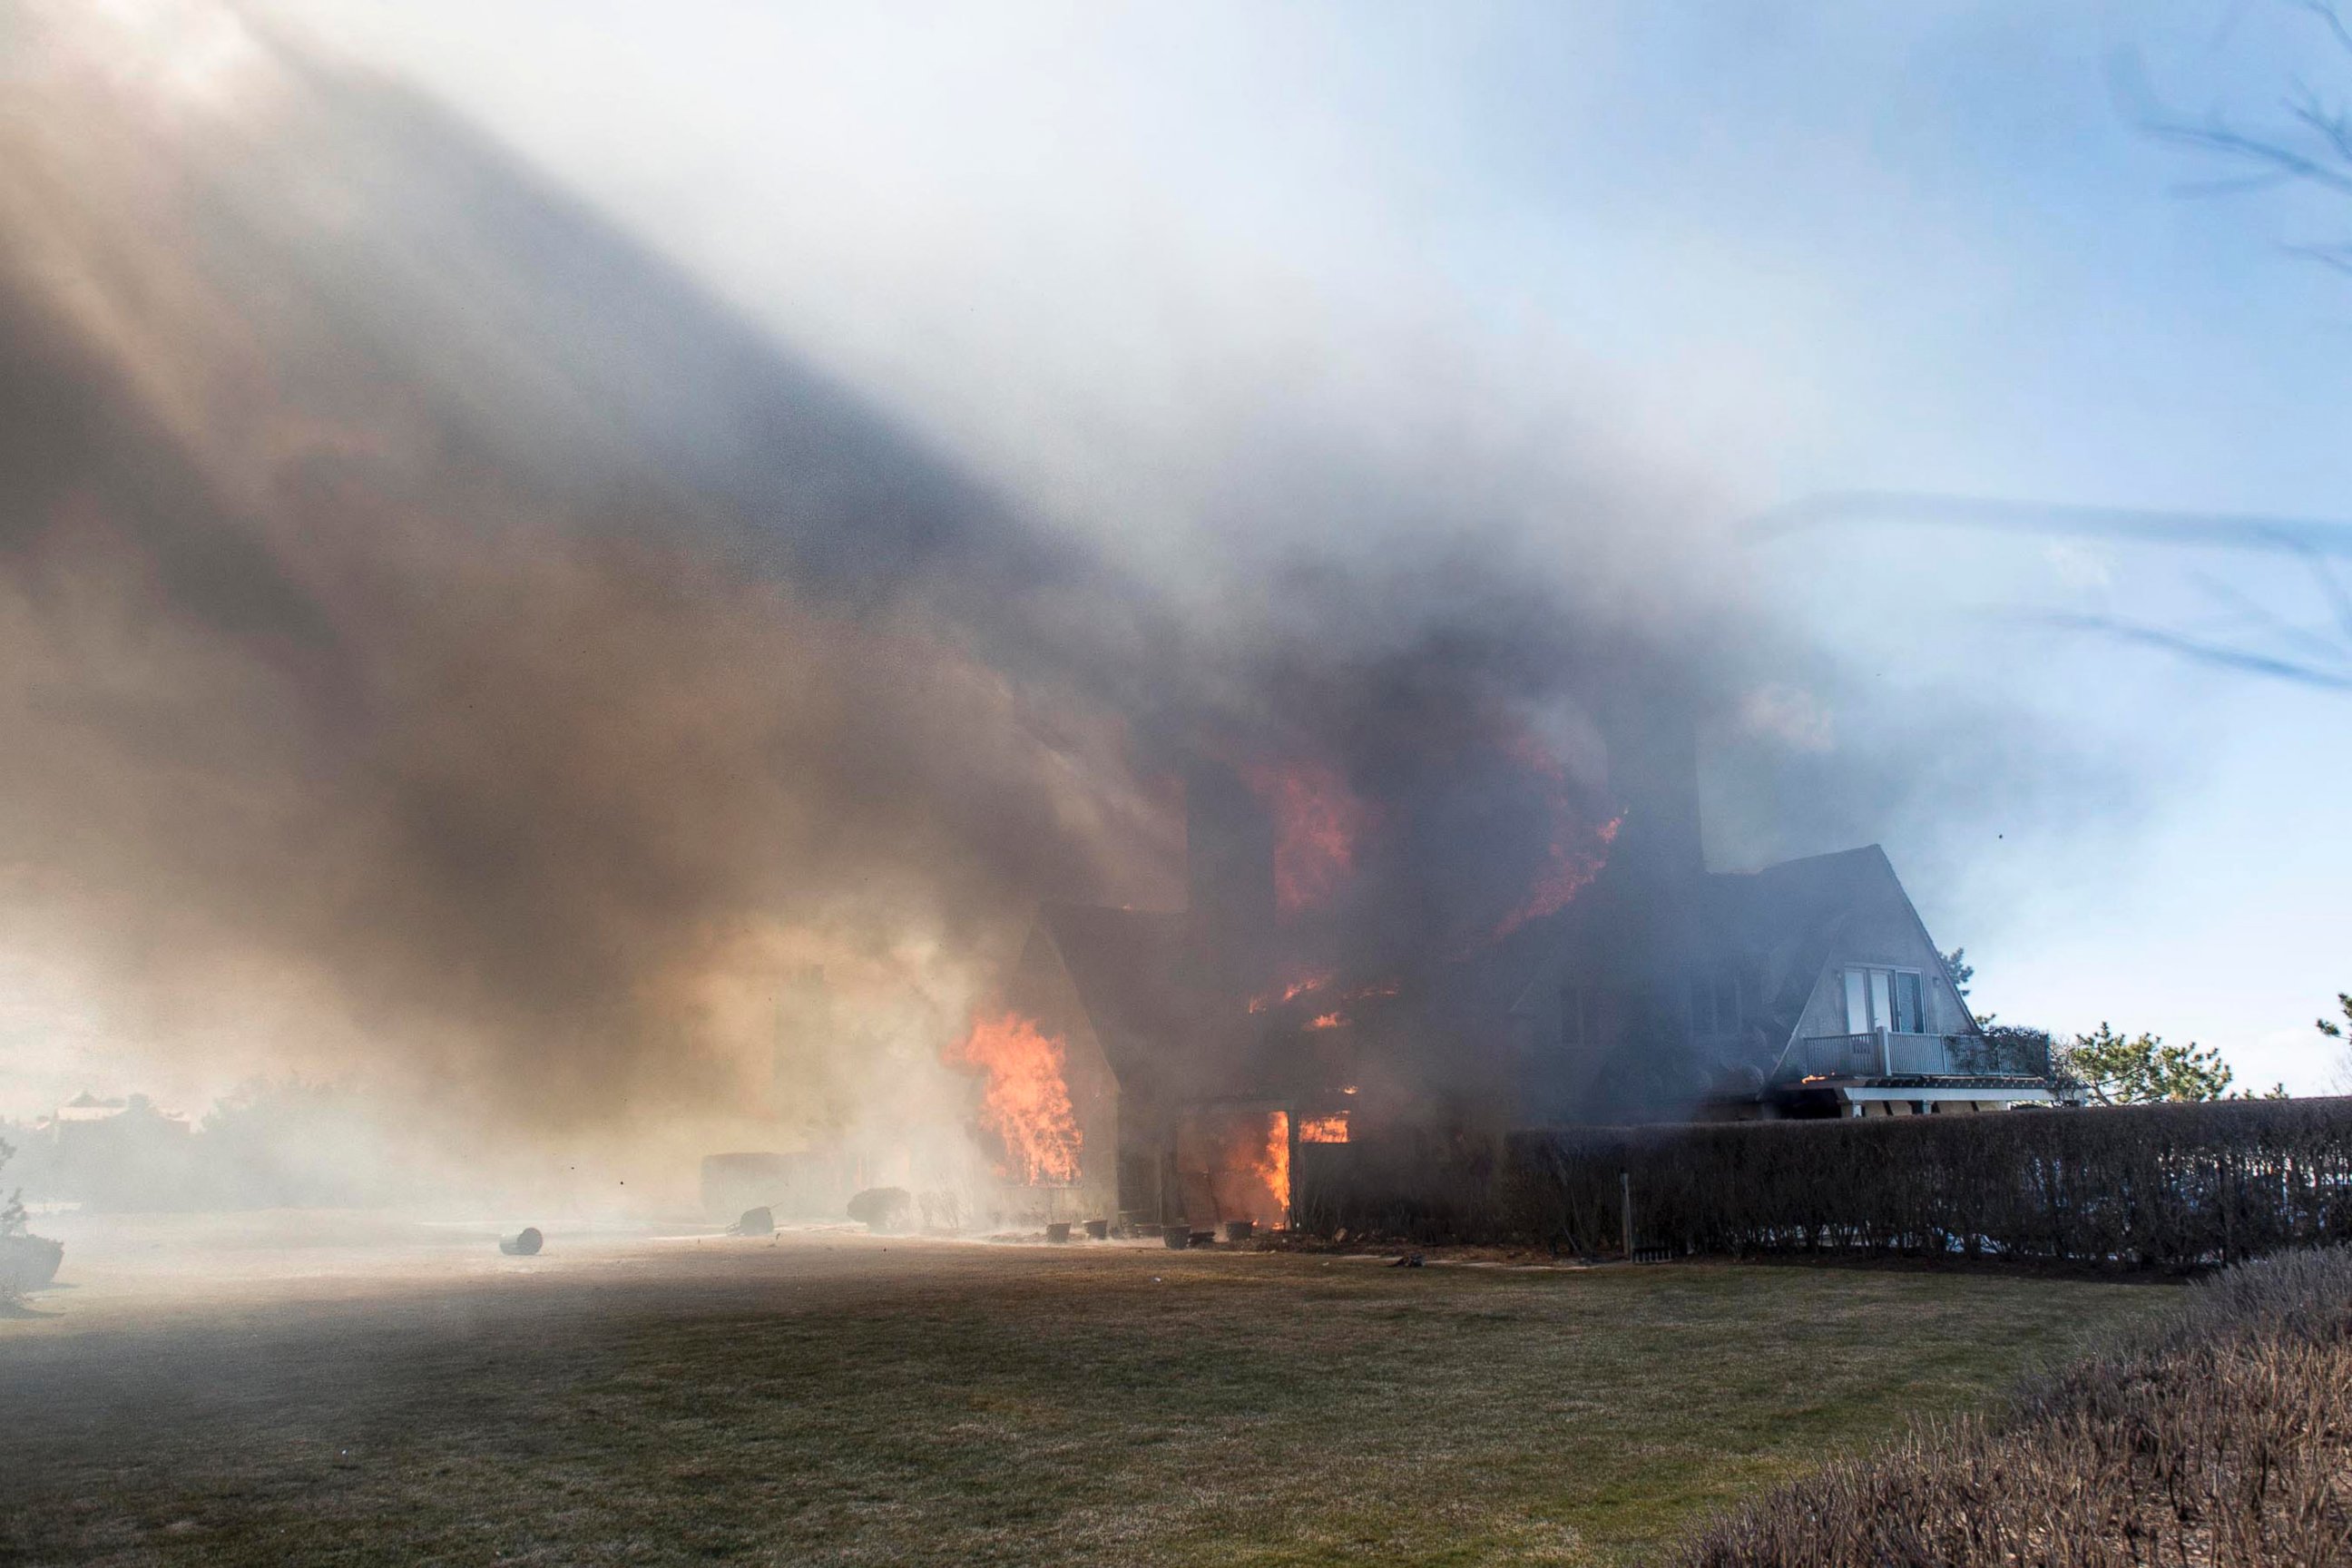 PHOTO: Massive fire destroys a house in East Hampton, N.Y. The ten bedroom waterfront mansion was totally destroyed in the blaze.